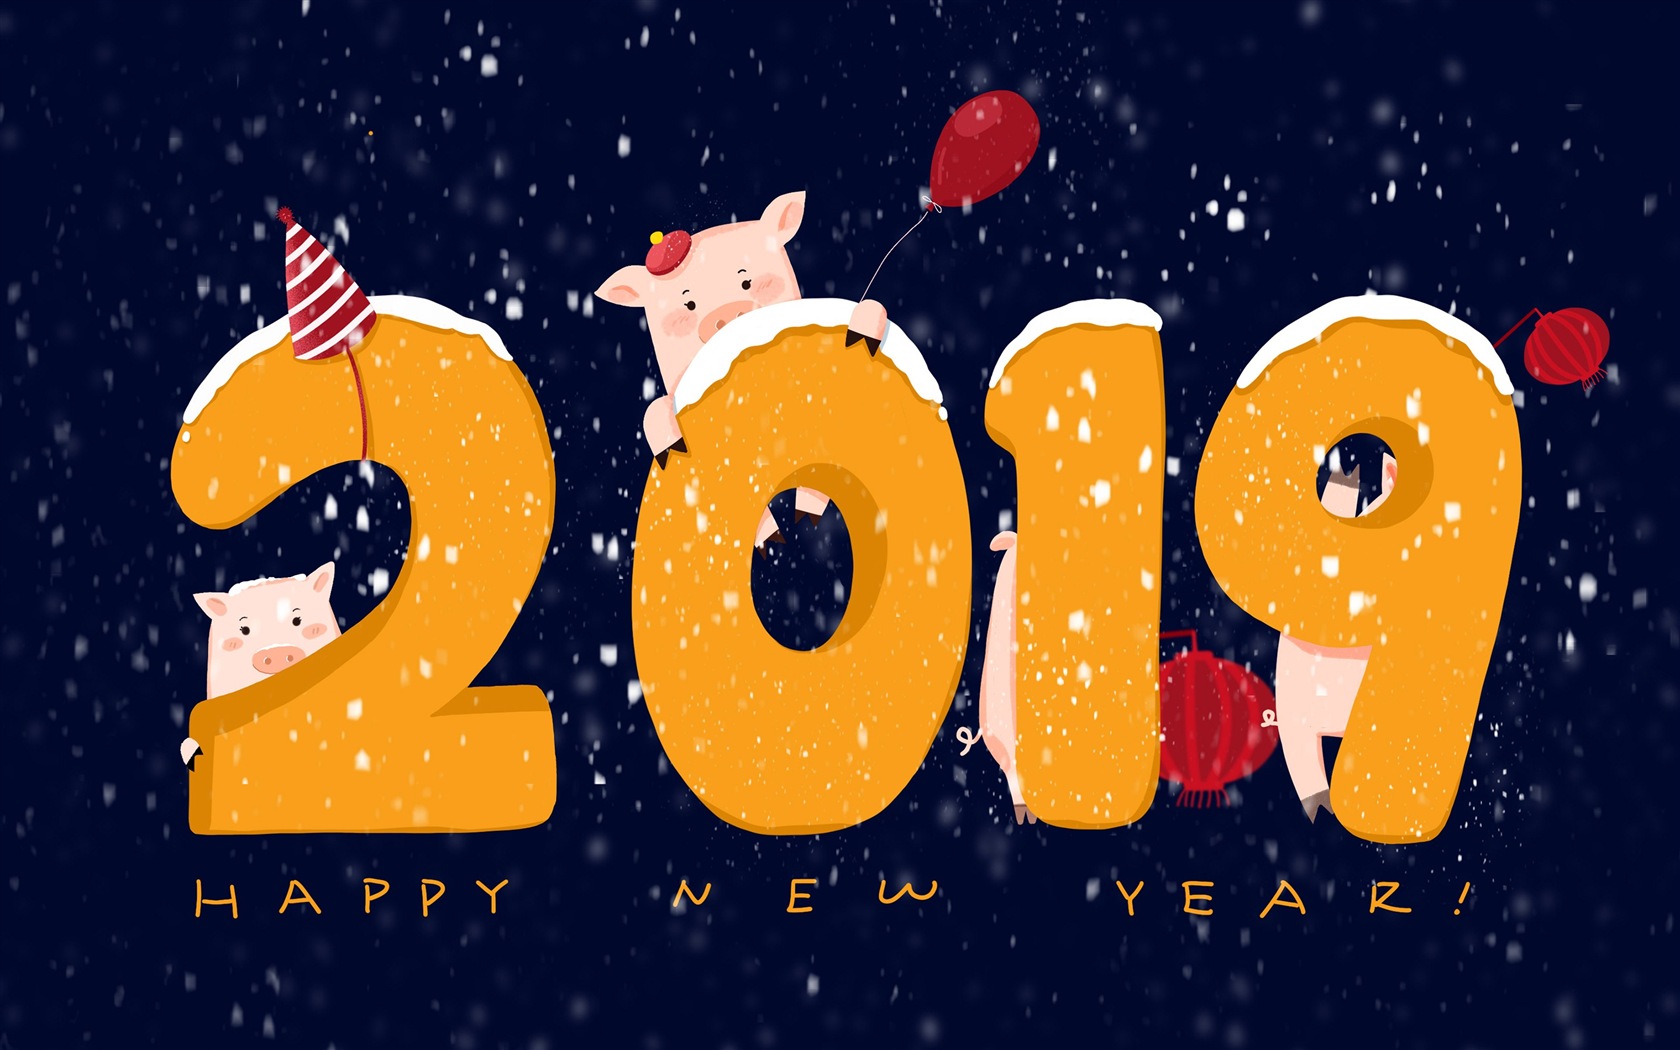 Happy New Year 2019 HD wallpapers #18 - 1680x1050